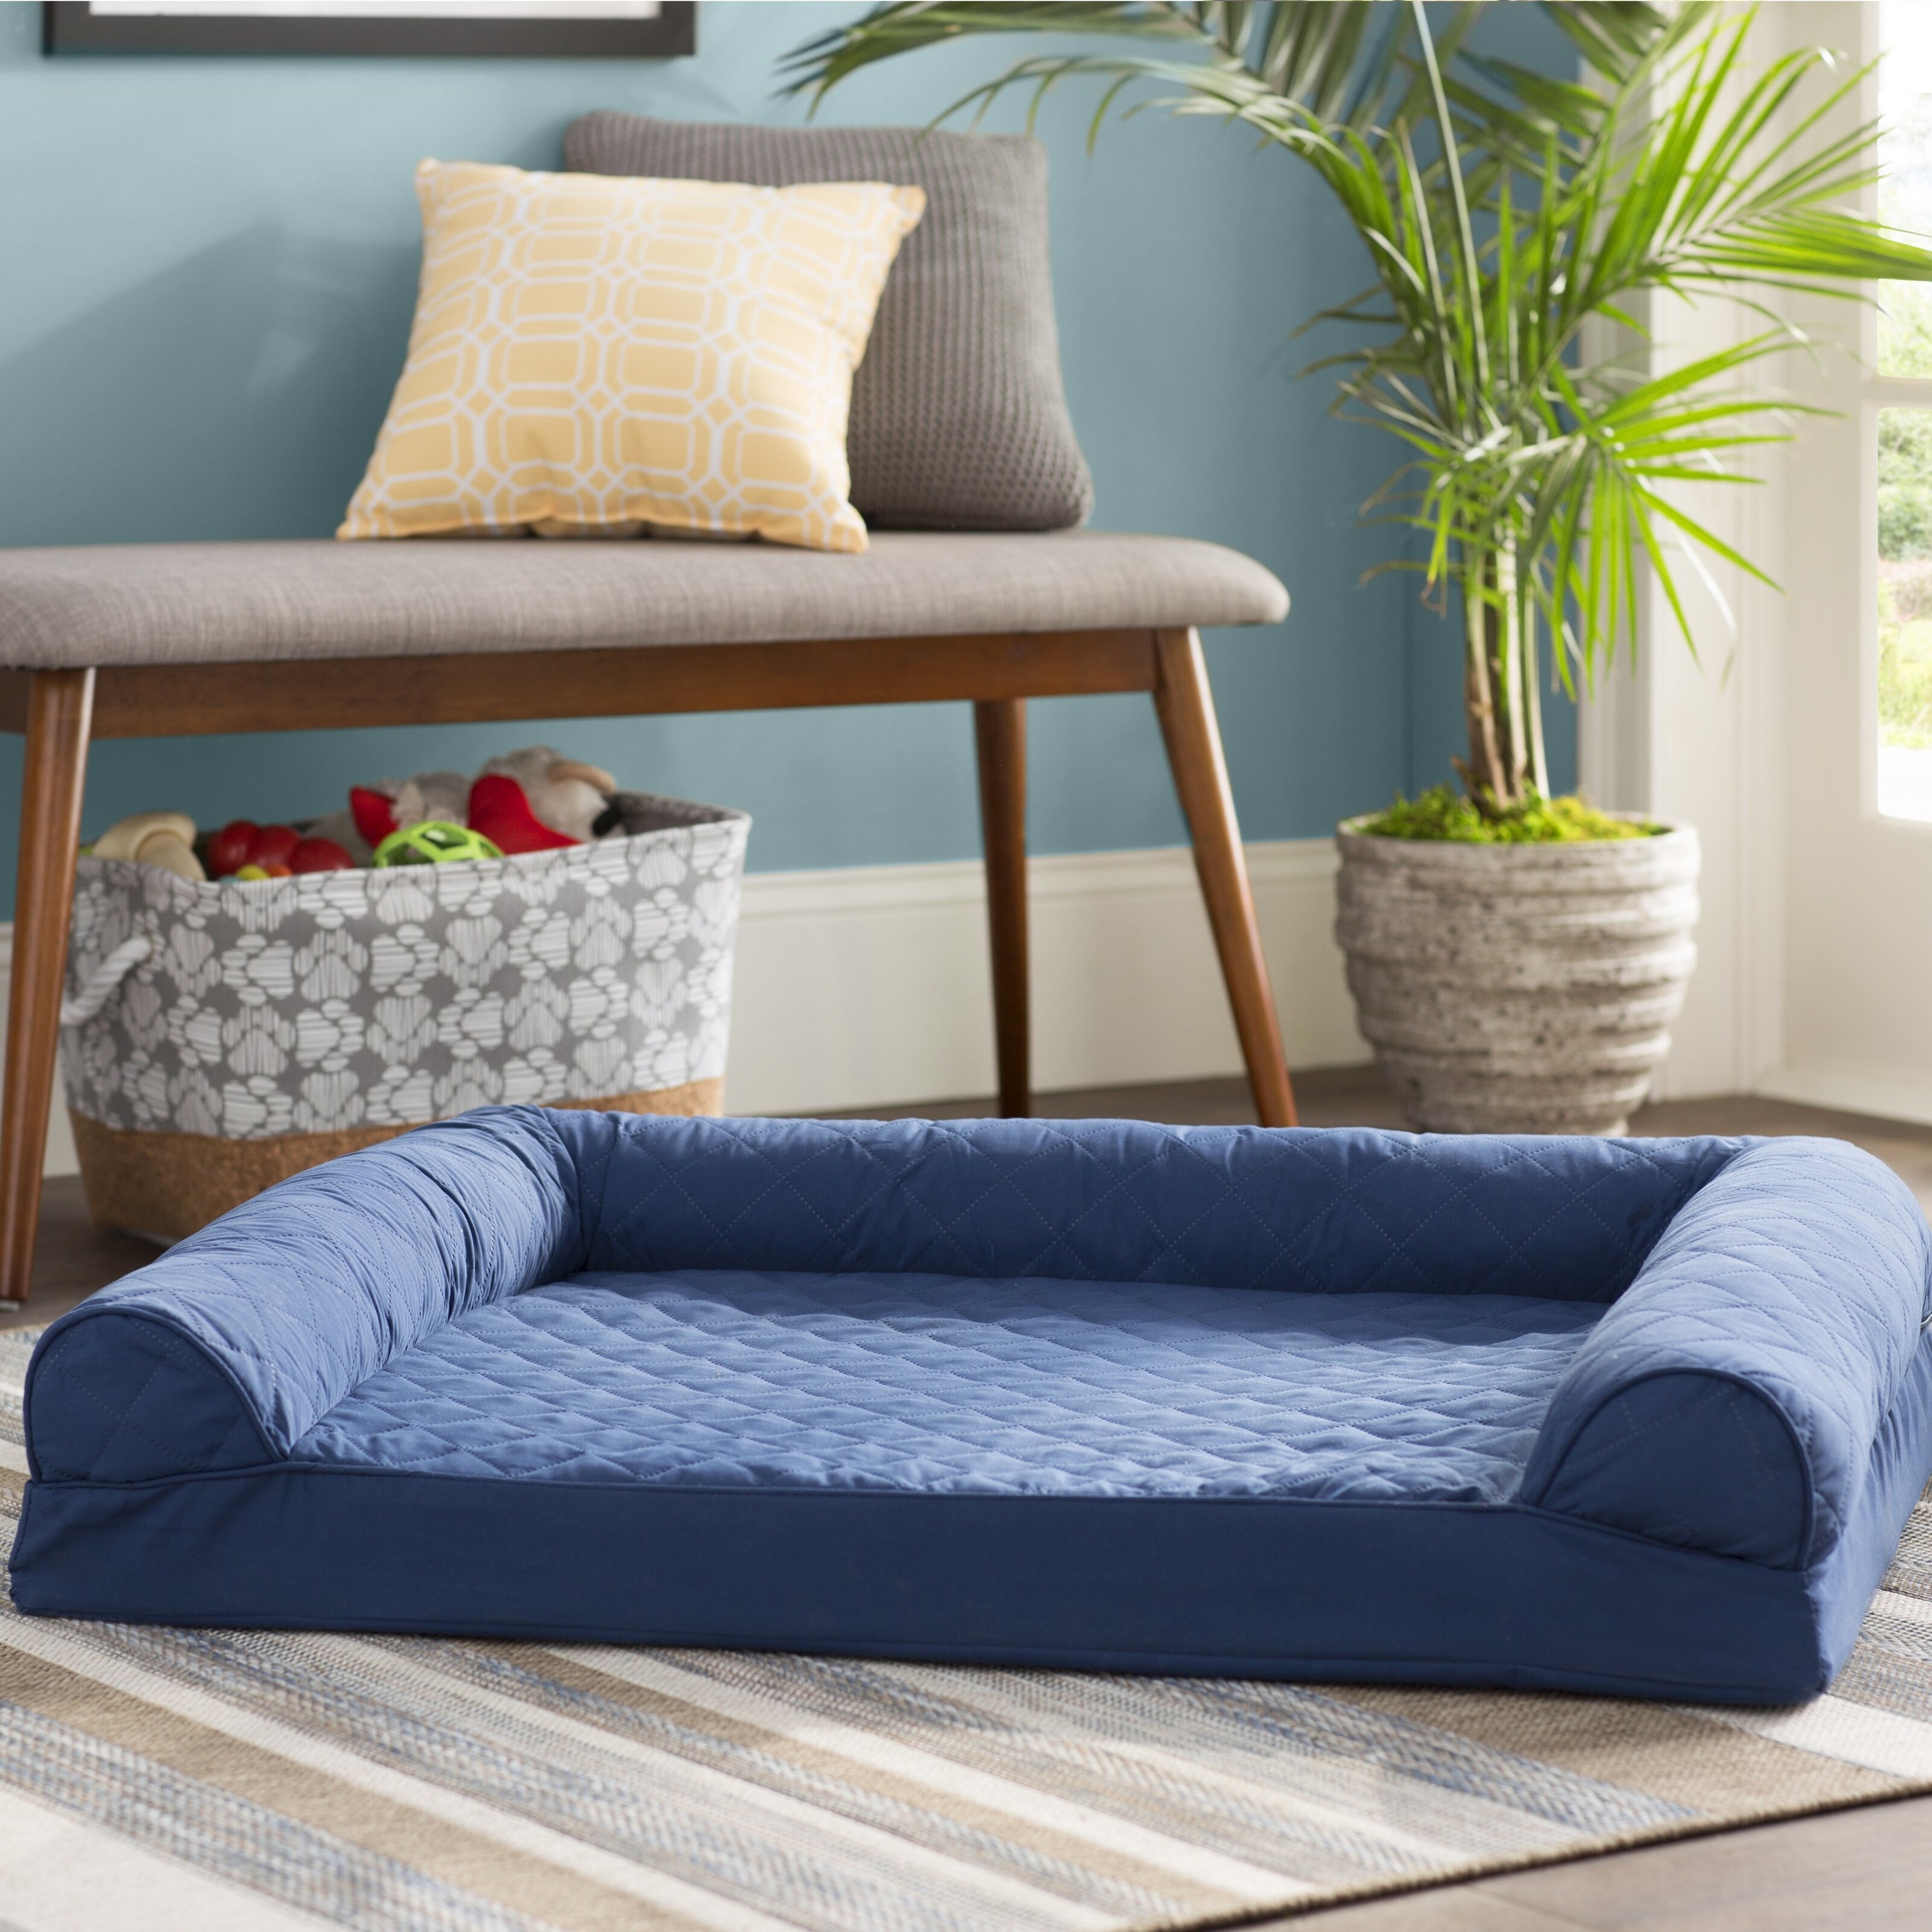 The dog bed in navy